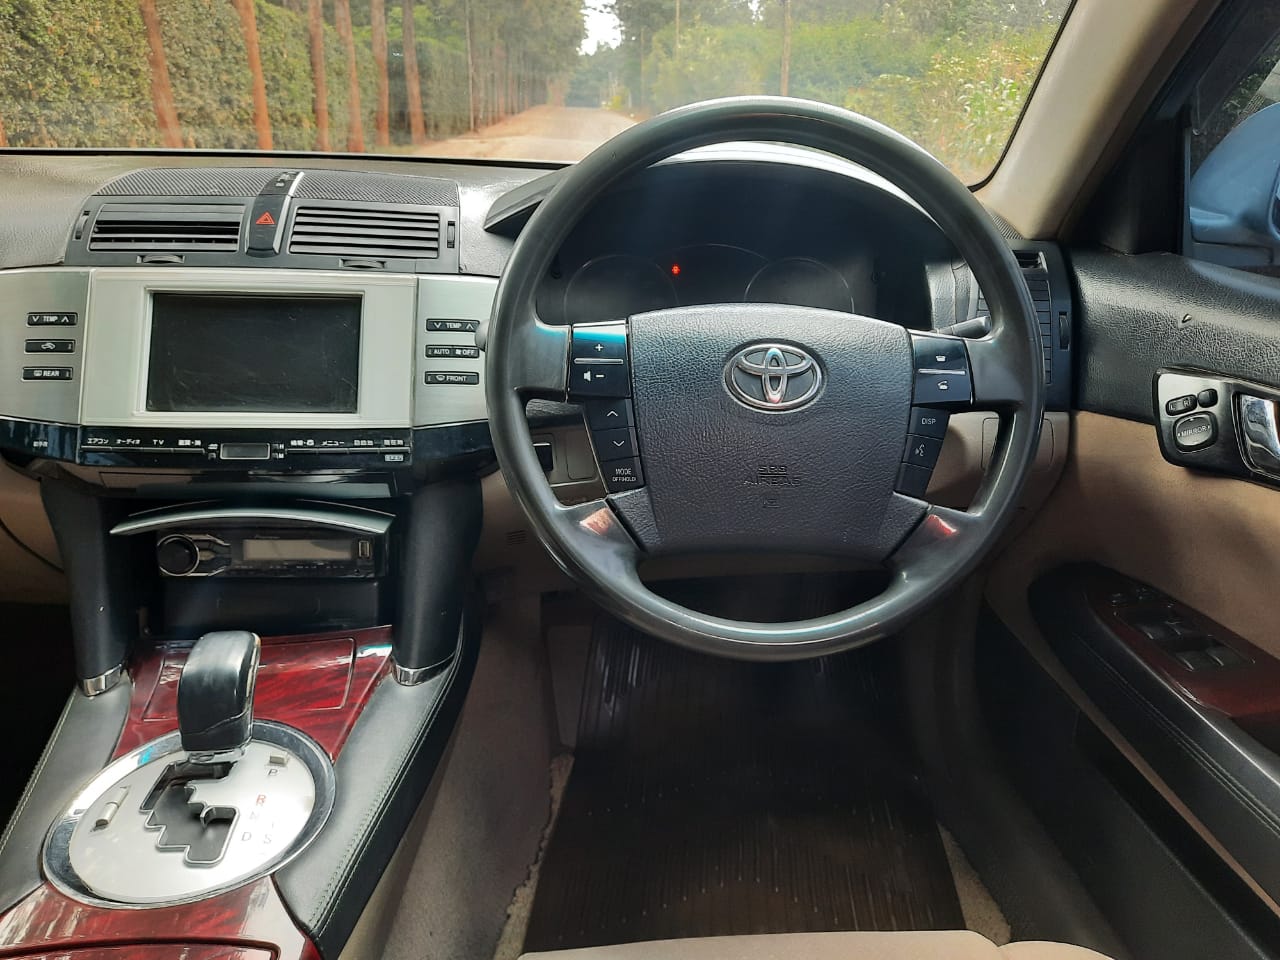 Toyota Mark X 590K Pay 20% 80% in 60 Monthly INSTALLMENTS Cheapest as new